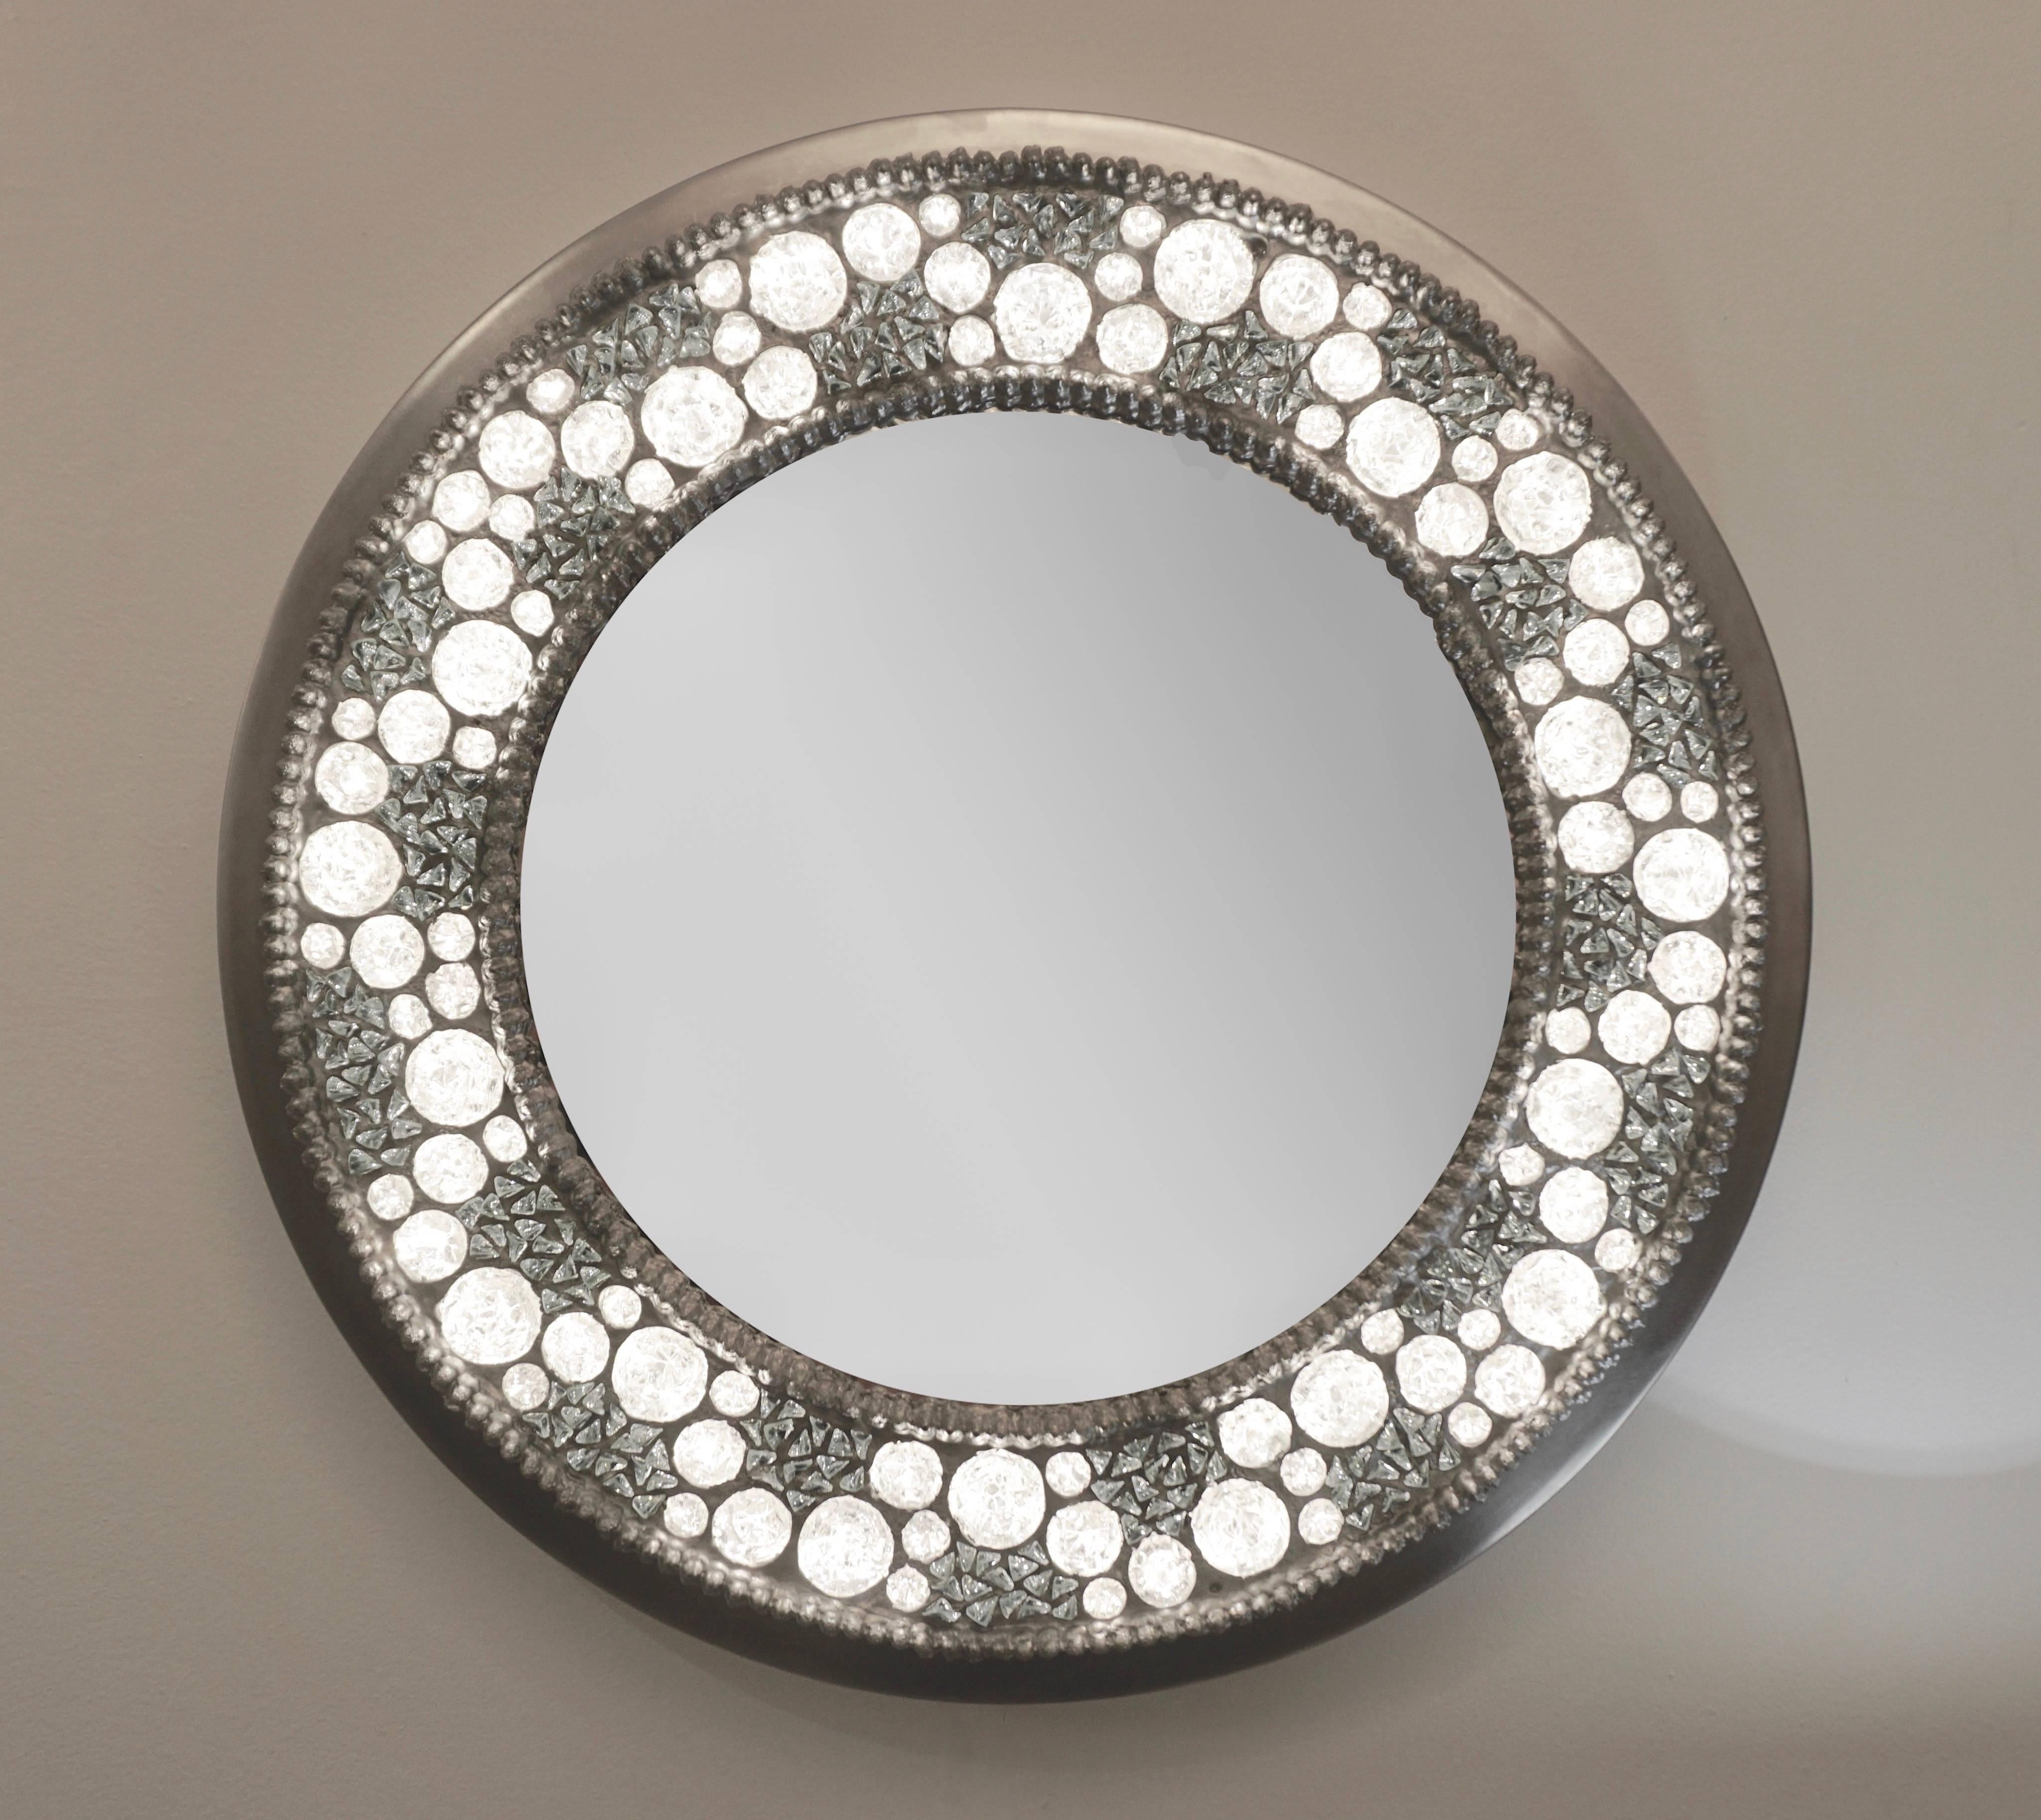 A jewel like Italian mirror, Work of Art sculpture, entirely hand crafted. The exterior frame is in hand bent nickel, while the sophisticated decoration is composed of hand cut rock crystal diamond elements of different sizes set in reverse inside a